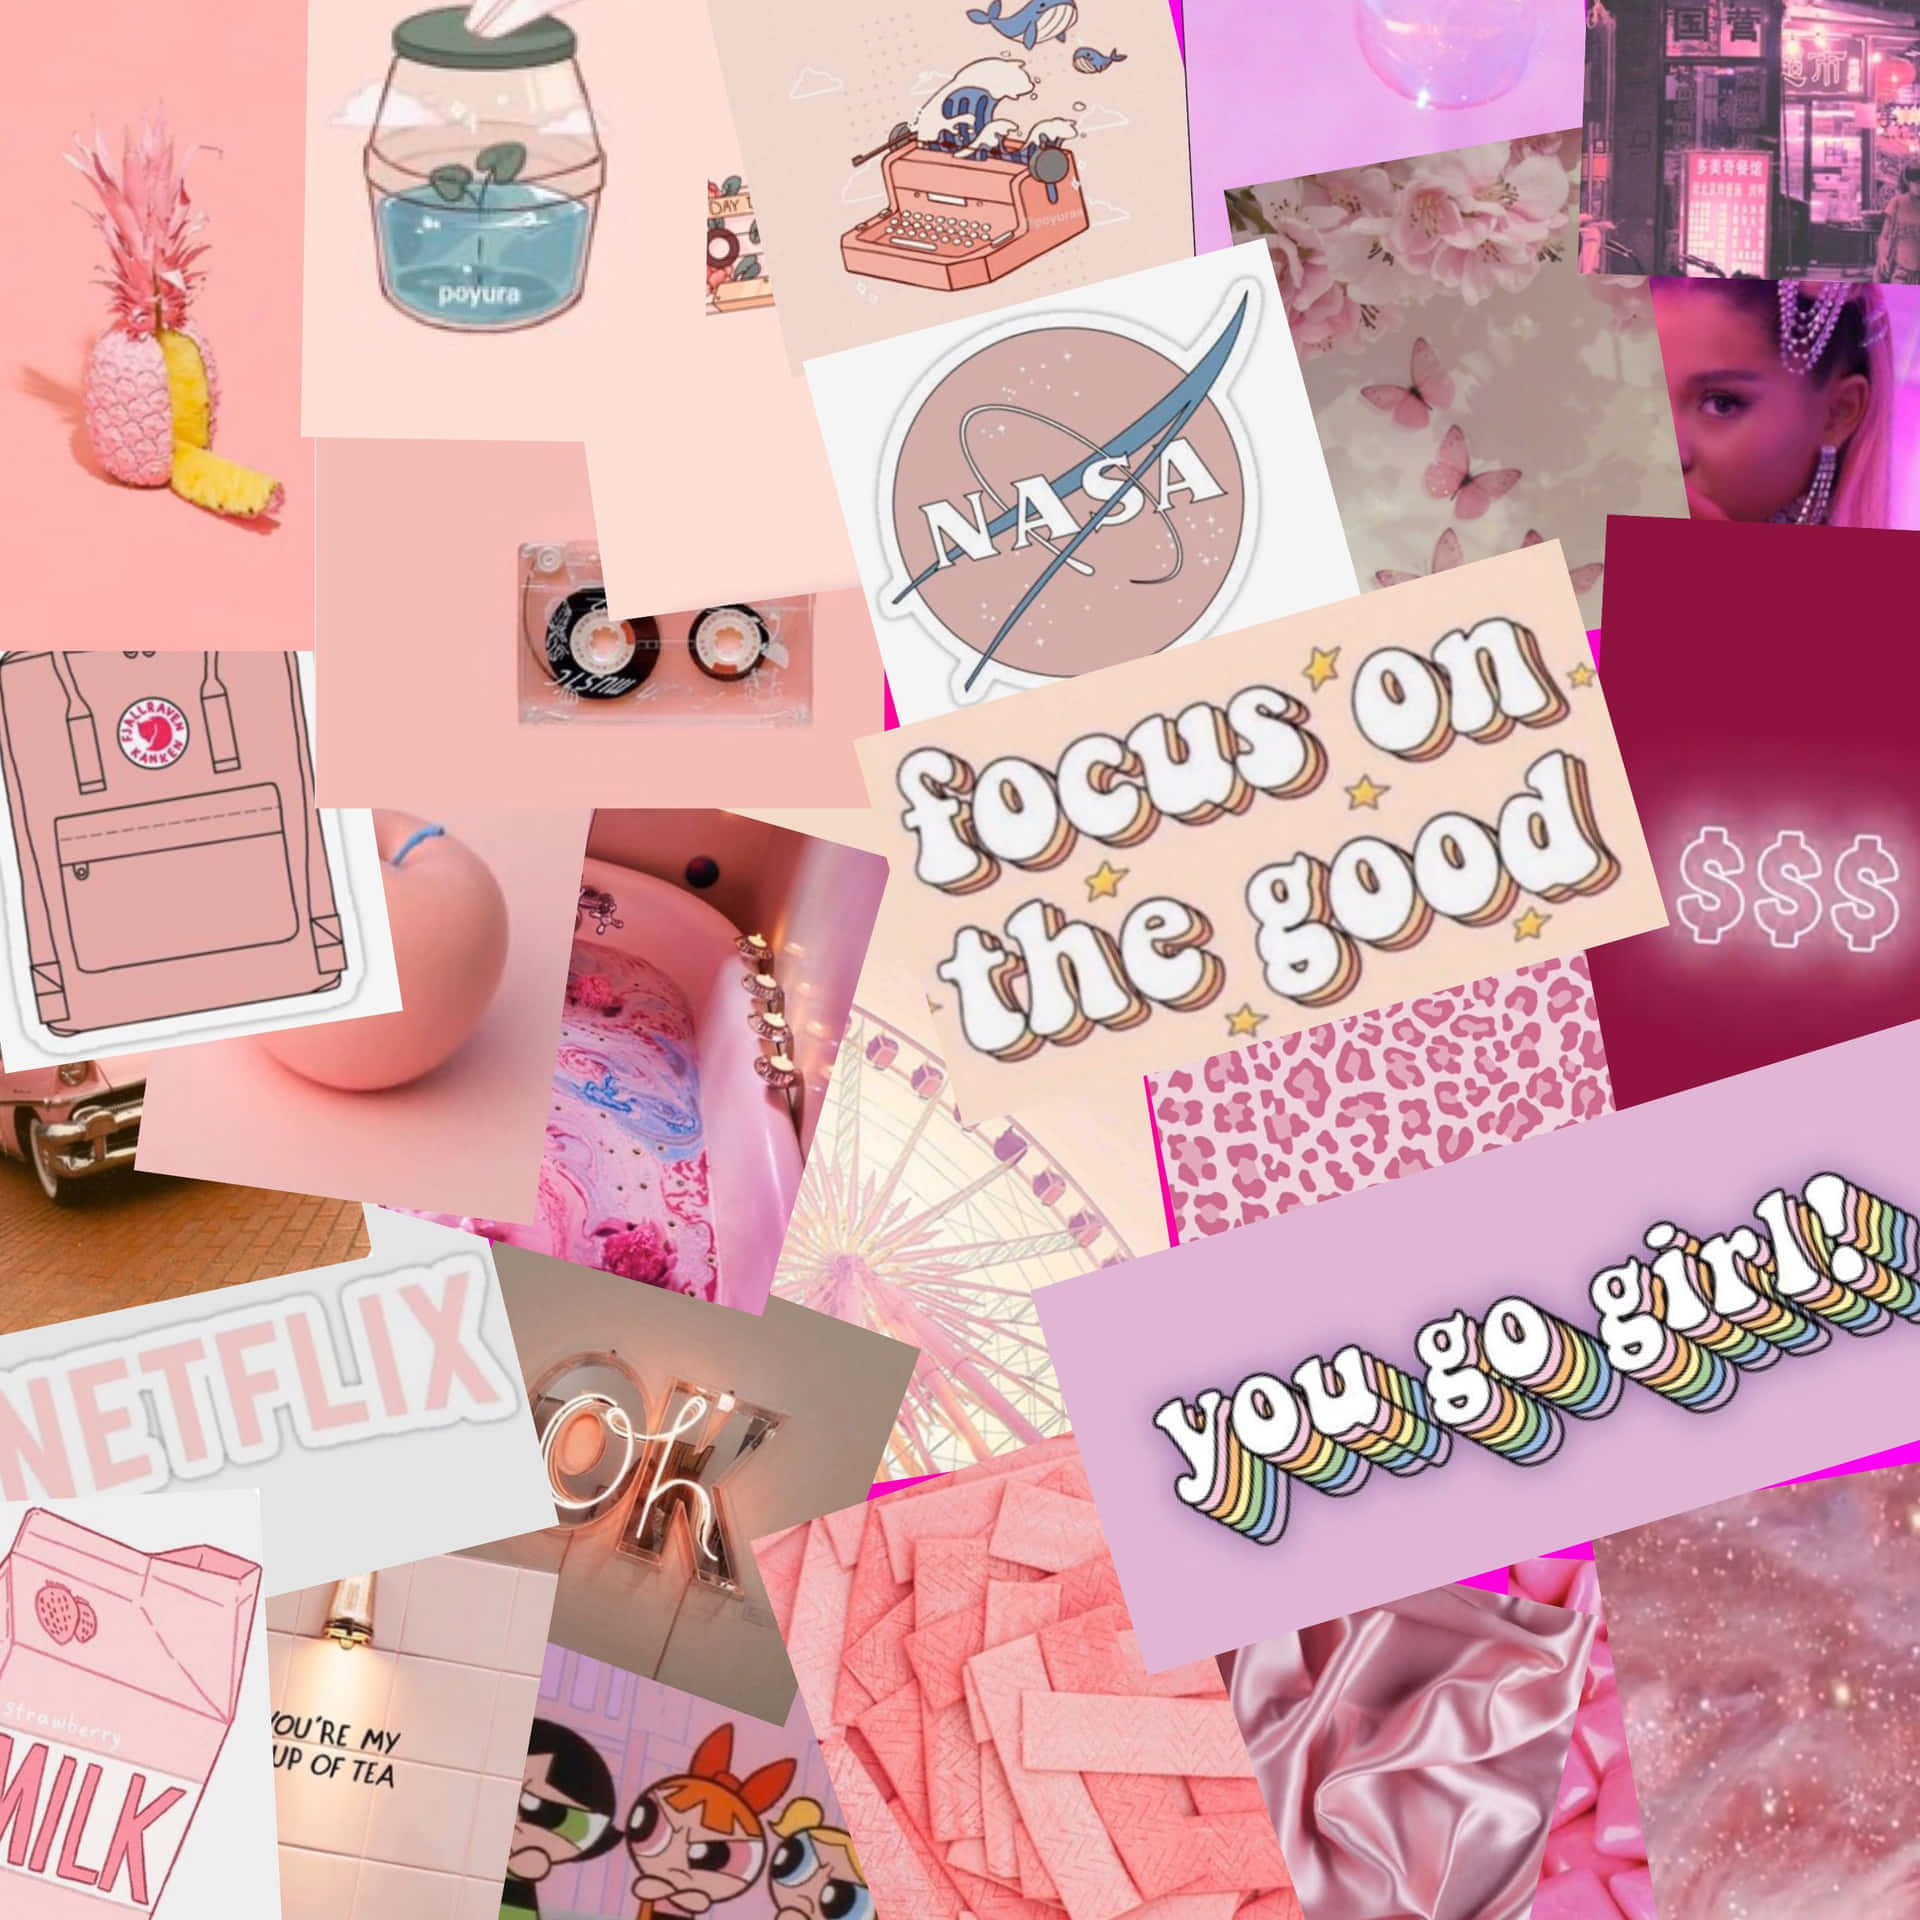 A Collage Of Pink And White Items Wallpaper